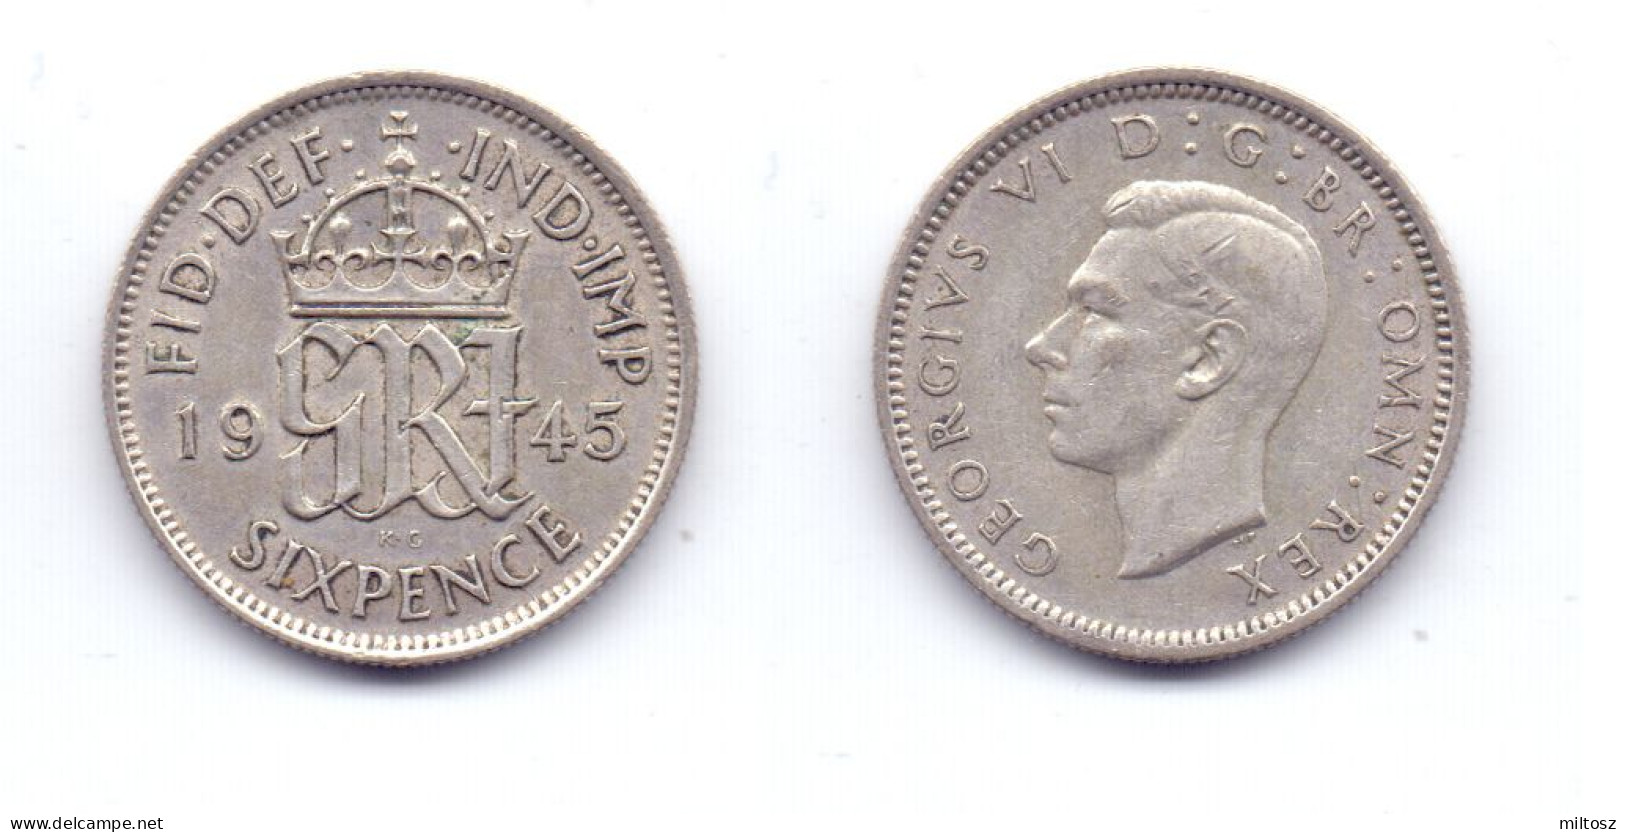 Great Britain 6 Pence 1945 - H. 6 Pence